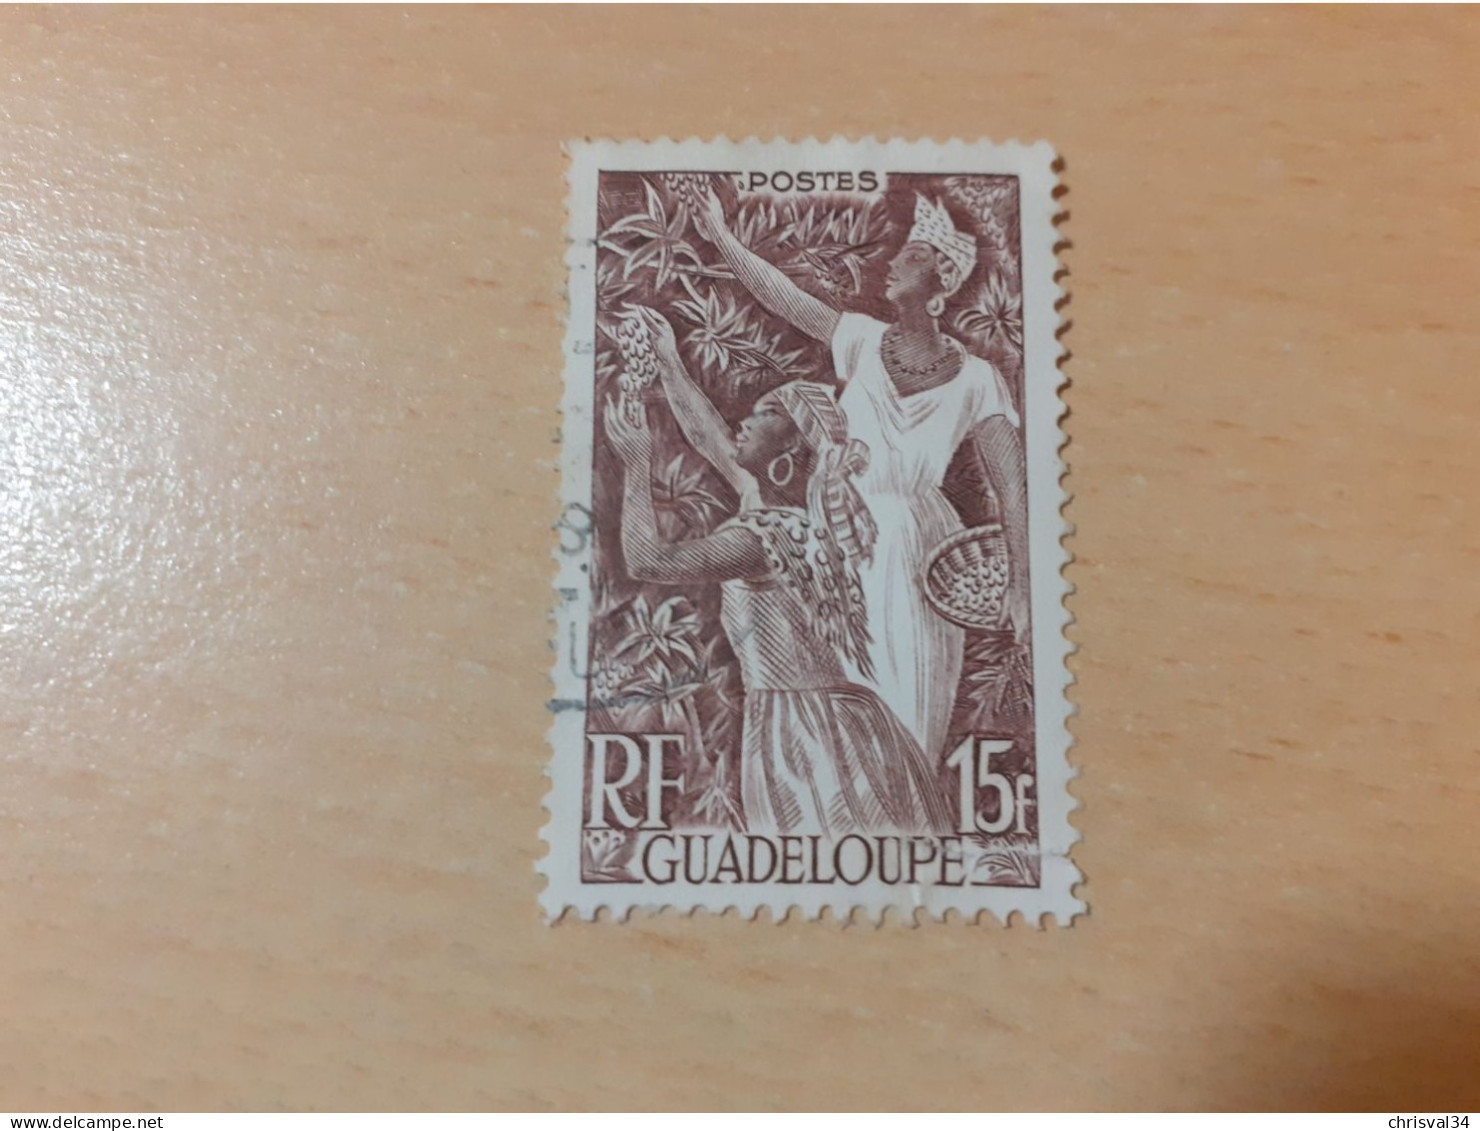 TIMBRE   GUADELOUPE       N  210    COTE  1,50   EUROS  OBLITERE - Gebraucht